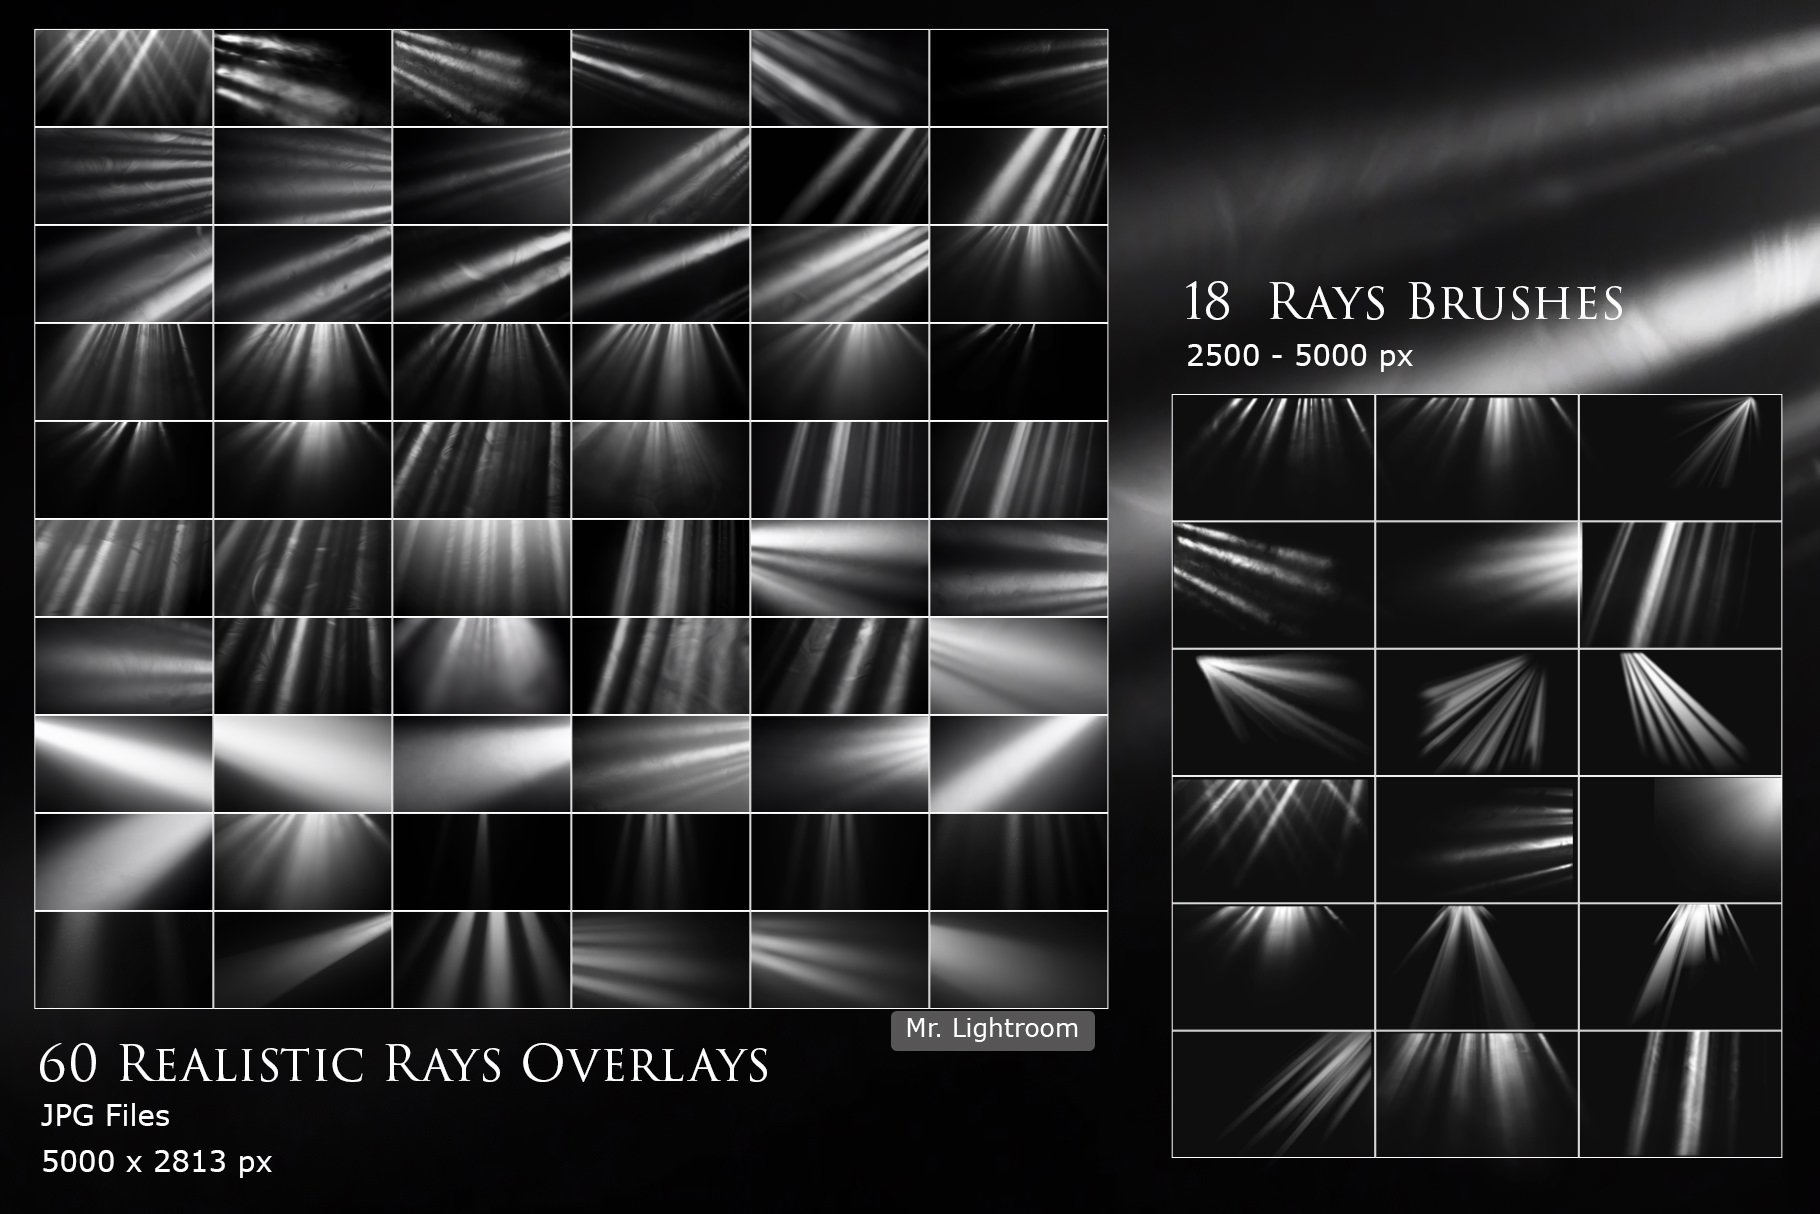 158 Realistic Rays and Floating Dustpreview image.